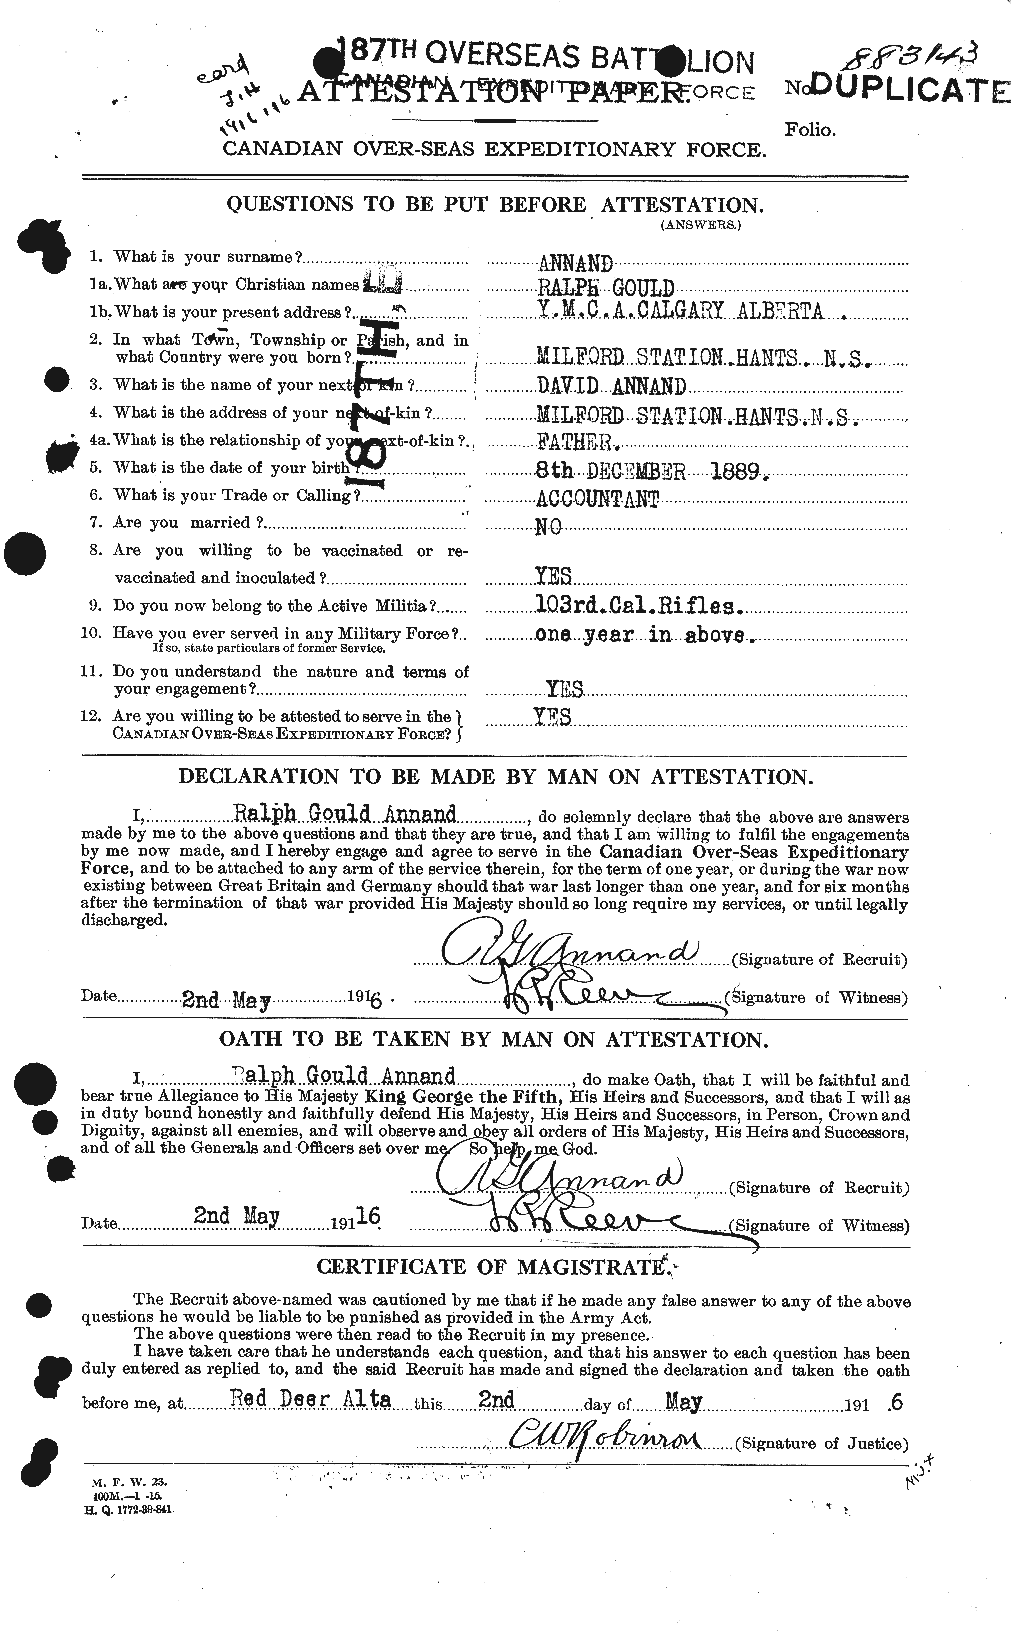 Personnel Records of the First World War - CEF 212488a